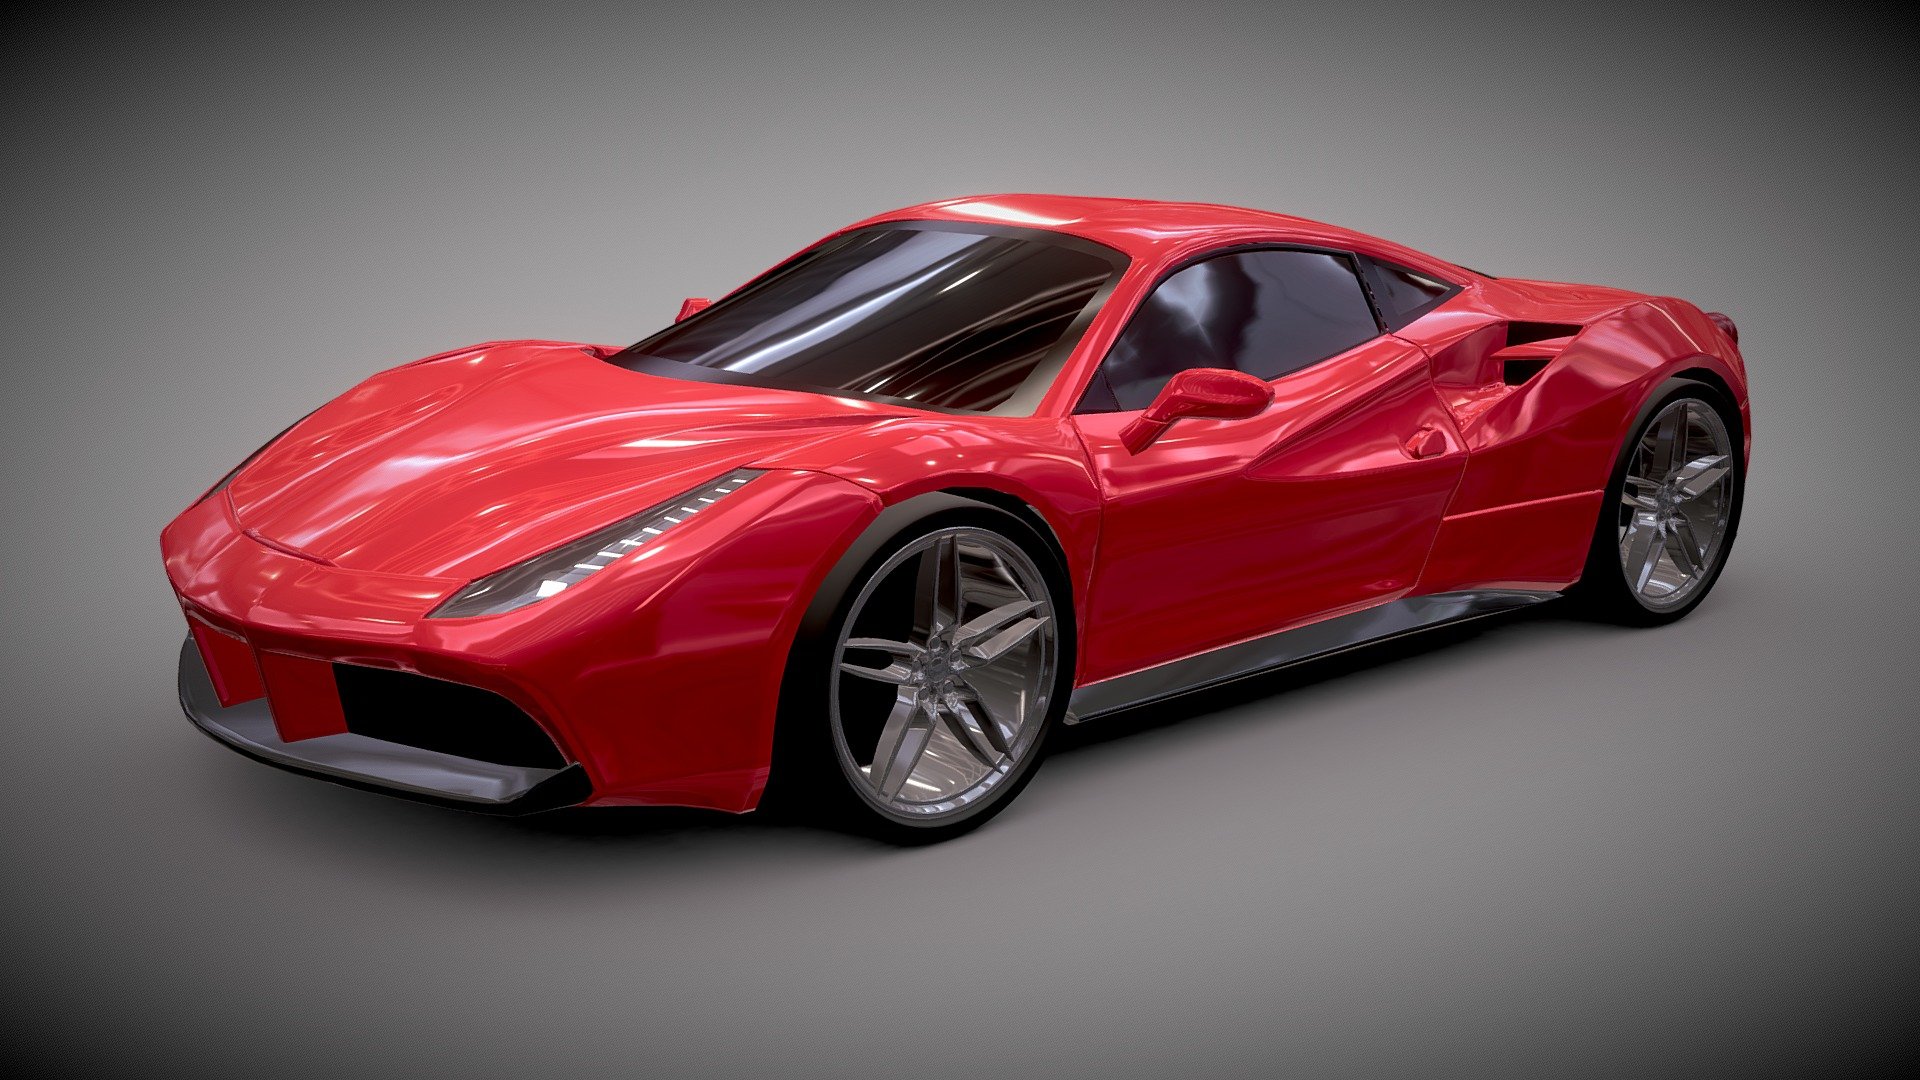 Pretty detailed but not very accurate 3d model of ferrari 488 gtb racing car restyled,was created in blender 3d 2.77 version.Rendering previews created with cycles rendering engine.Most of the objects are detached and named by object and by material.There is only one uv map texture for front grills projected from front view.There are no interior objects for this product.Model rendered with subdivision 2,until my 3d model exported with subdiv 1.Enjoy my product.

obj file verts: 71629 polys: 135788

3ds file verts: 407364 polys: 135788

Checked with GLC viewer - Ferrari 488 Gtb restyled racing car - Buy Royalty Free 3D model by koleos3d 3d model